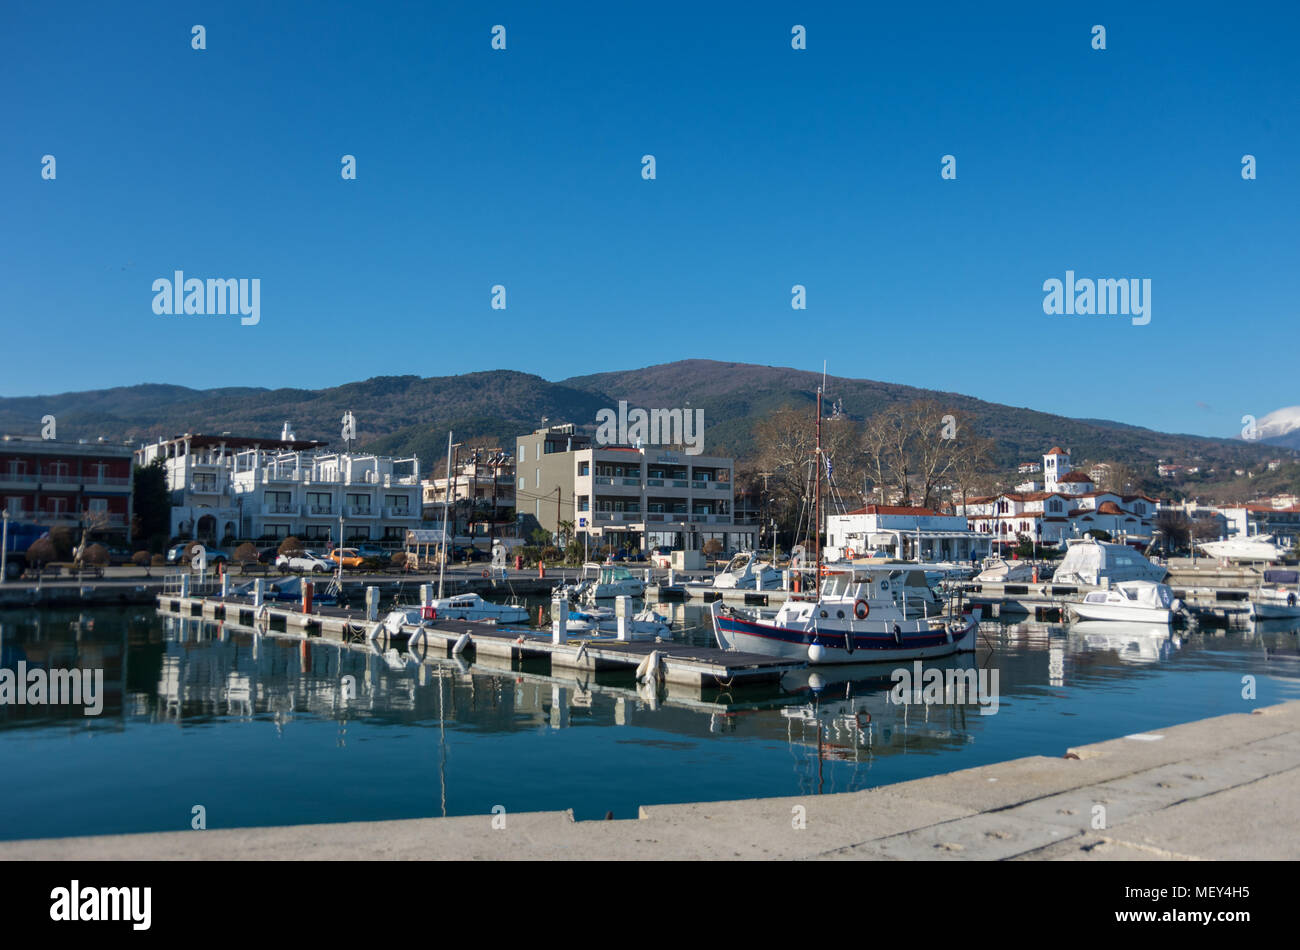 Harbor with boats and fishing schooners. Platamonas (Greek) is a sea-side resort and fishermans village in south Pireia, Central Macedonia. Stock Photo